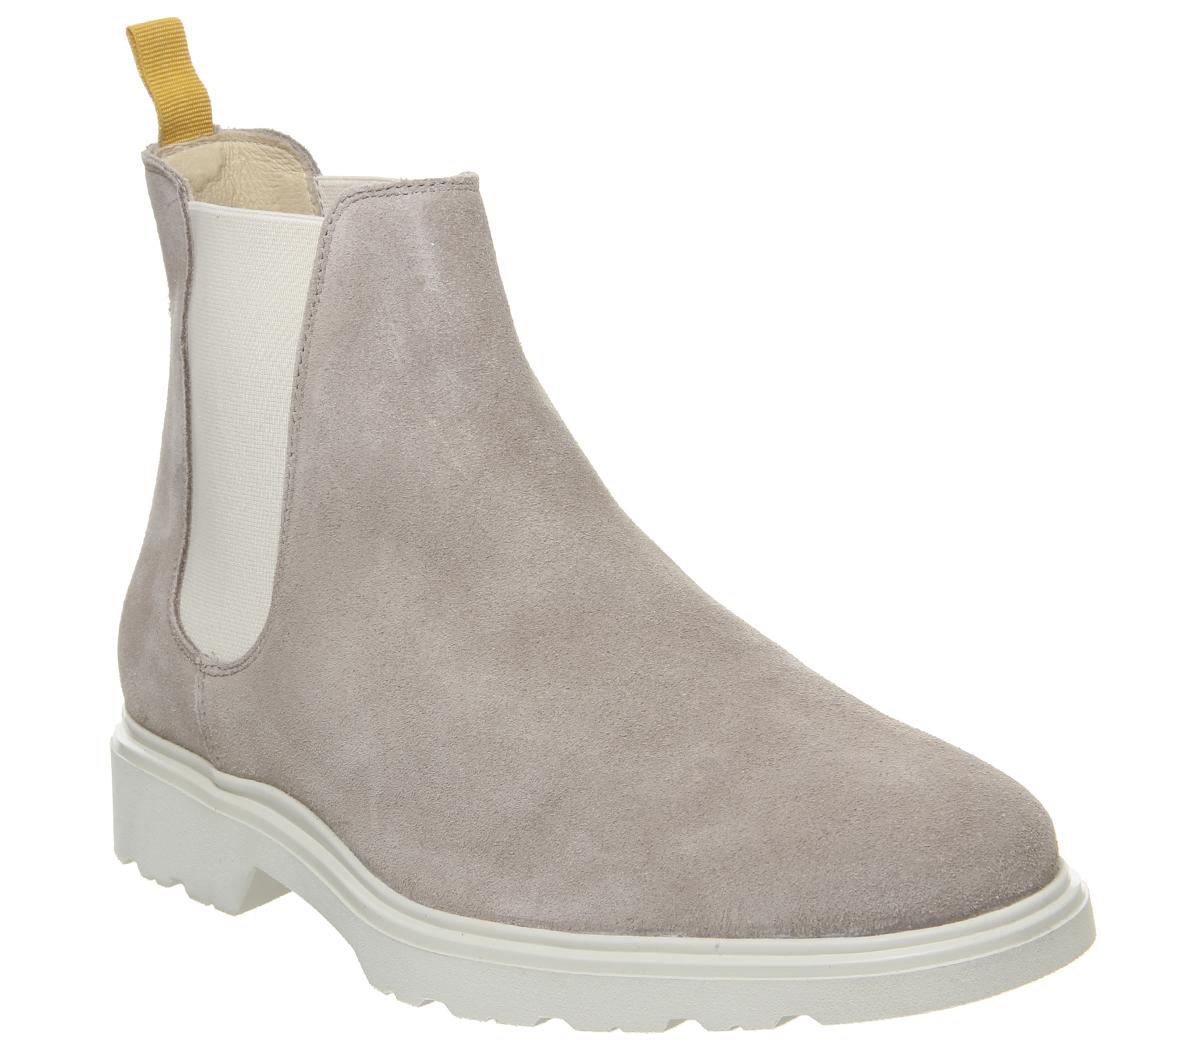 sand suede chelsea boots